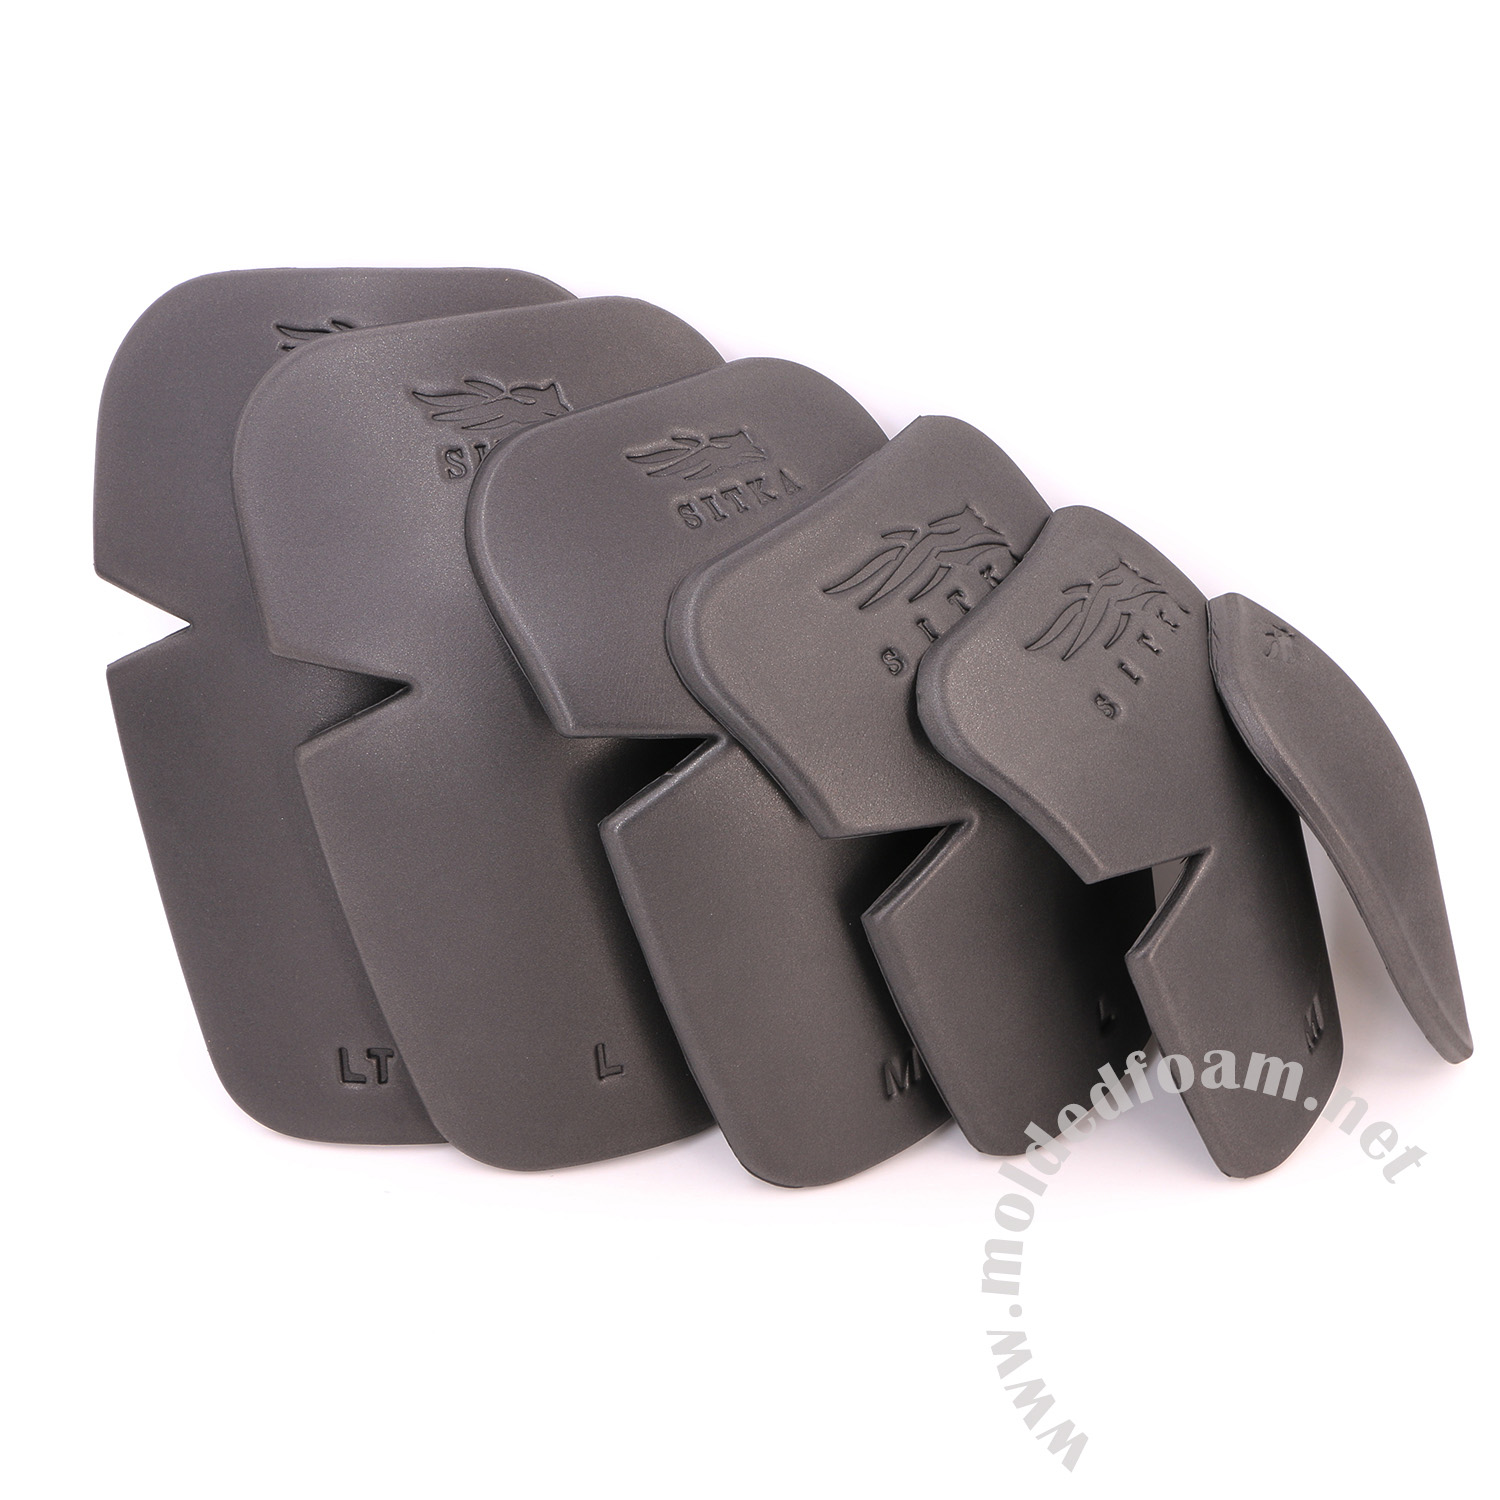 Custom molded rubber parts for sitka knee pad insert construction with  embossed logo